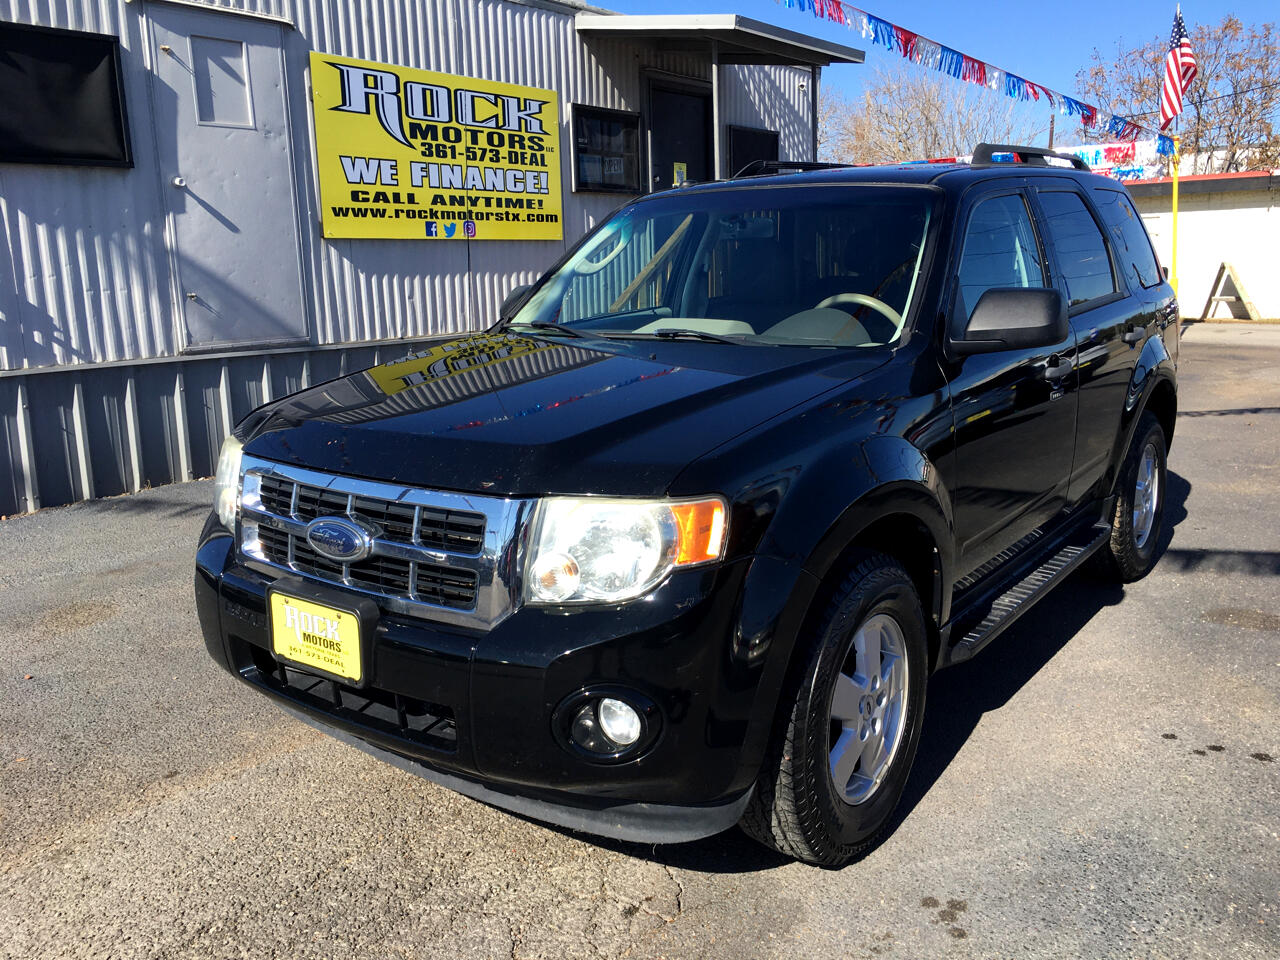 Ford Escape XLT FWD 2010